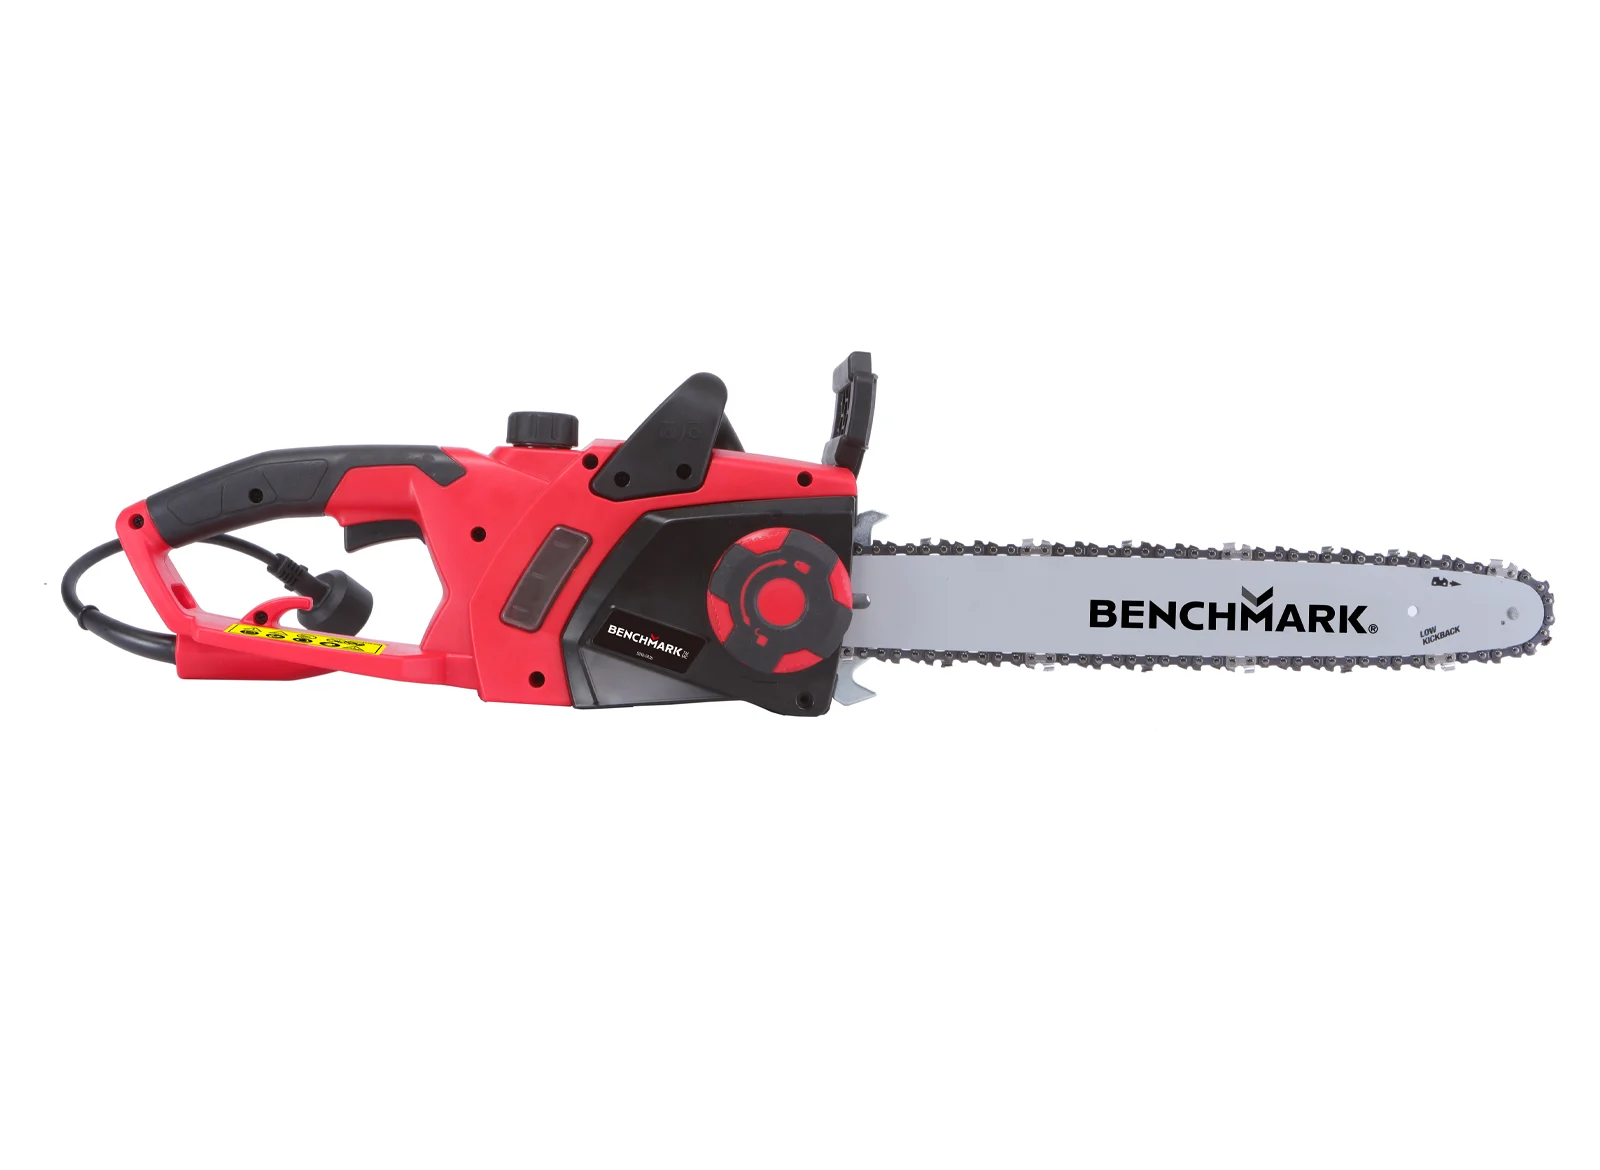 A Benchmark electric chainsaw 